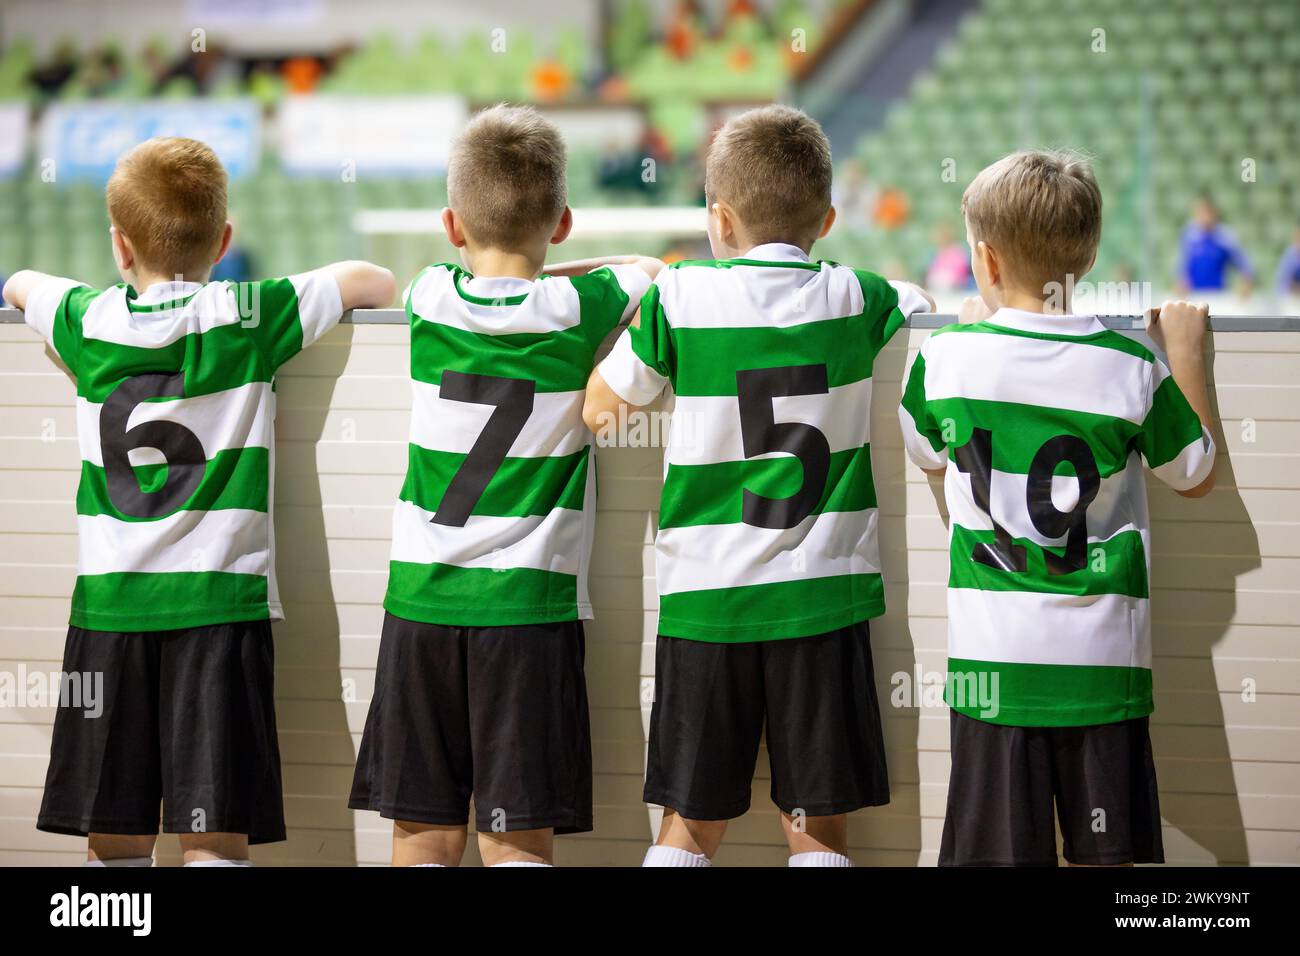 Group of children soccer players in striped jersey uniforms watching school tournament match. Football game for kids. Kids soccer teammates standing t Stock Photo